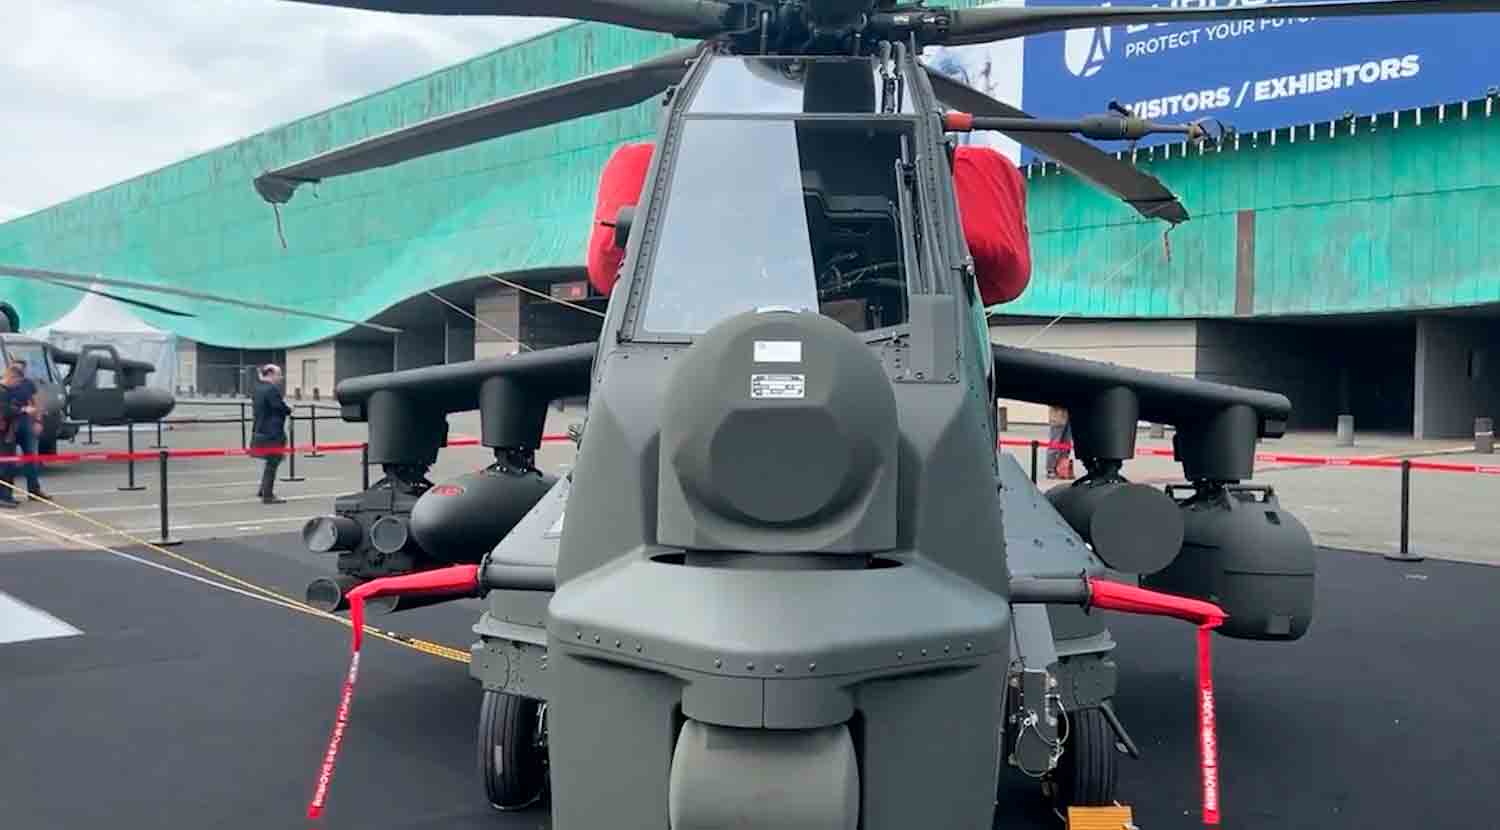 AW249. Fotos e vídeo: Twitter @LDO_Helicopters